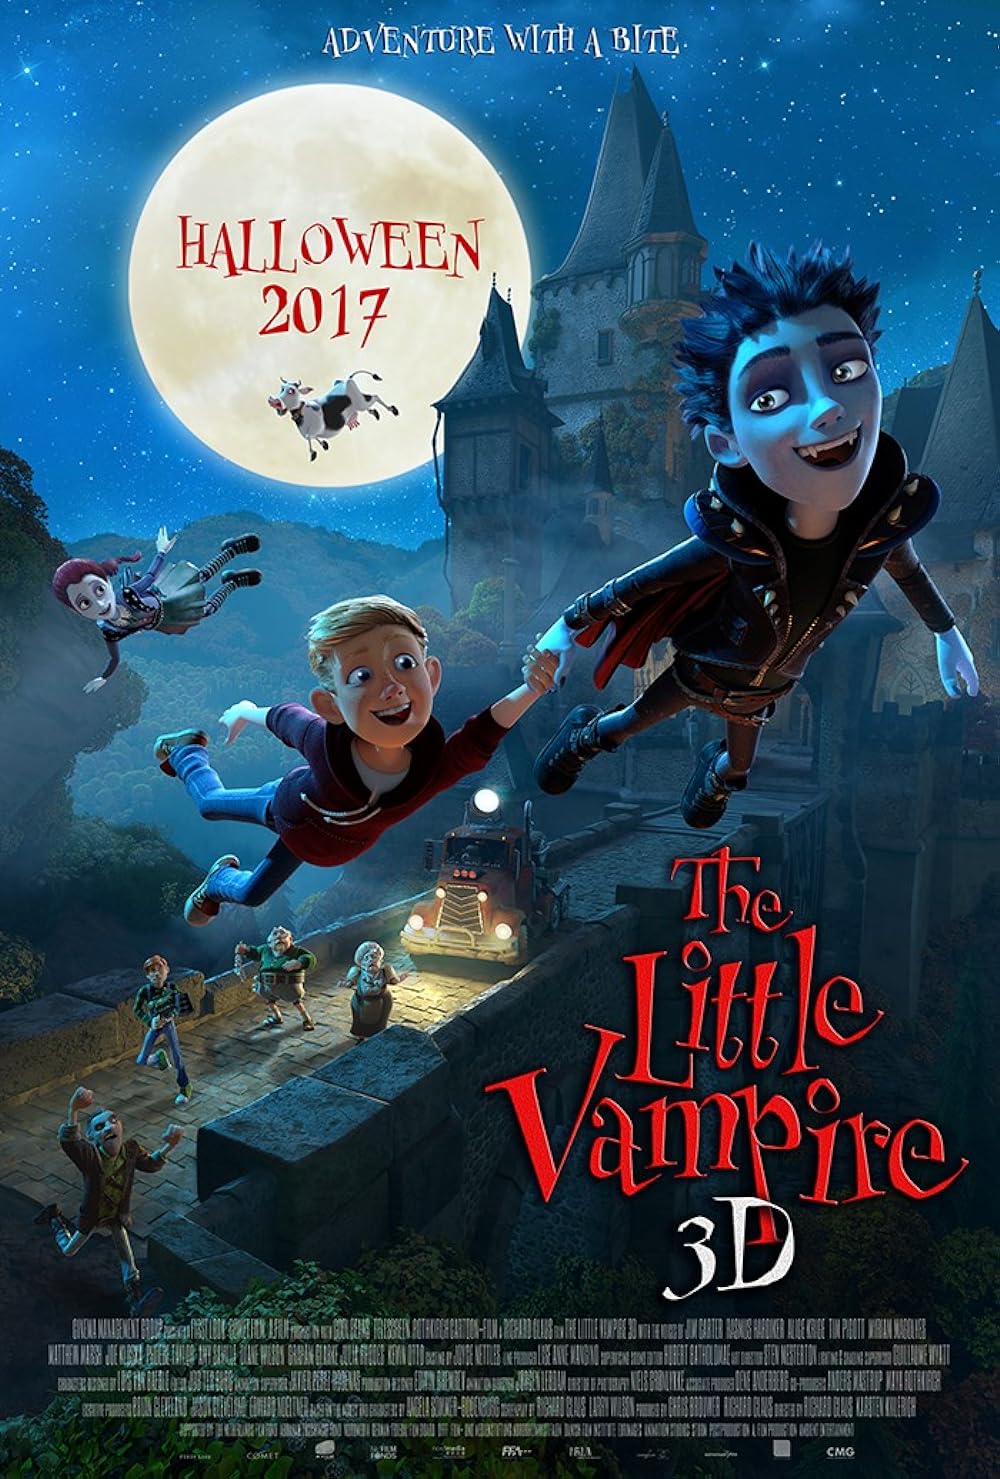 The Little Vampire- Halloween Movies For Family